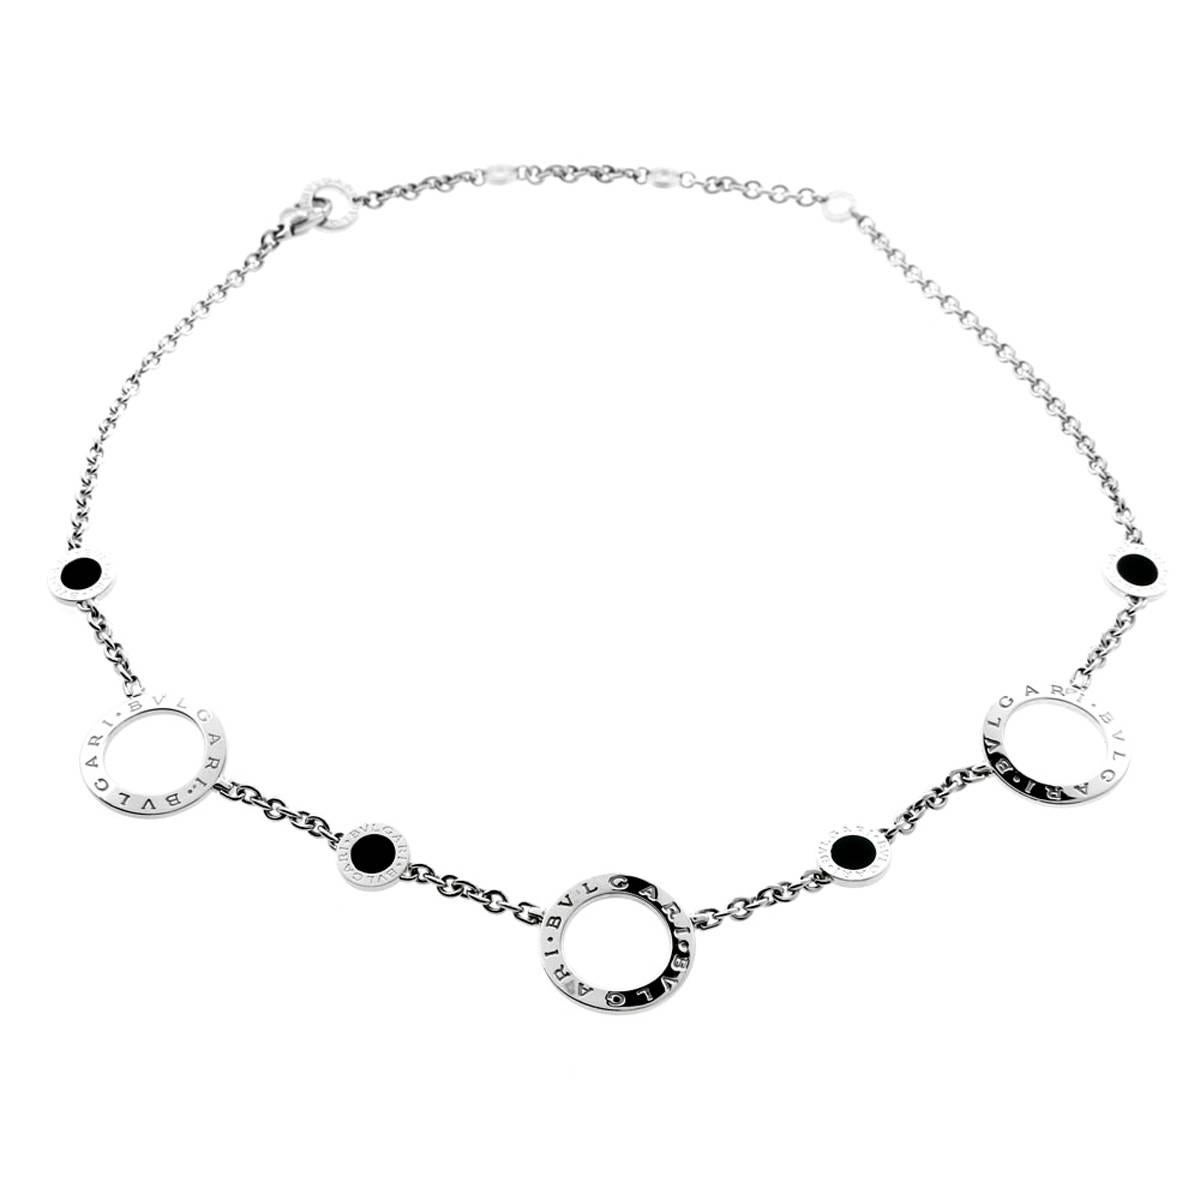 A fine Bulgari keepsake, this polished 18K white gold necklace is a wear-anywhere piece of jewelry. Alternating black onyx semi-precious spacer stones and polished Bulgari imprinted circles display the intricate yet contemporary luxury style of the